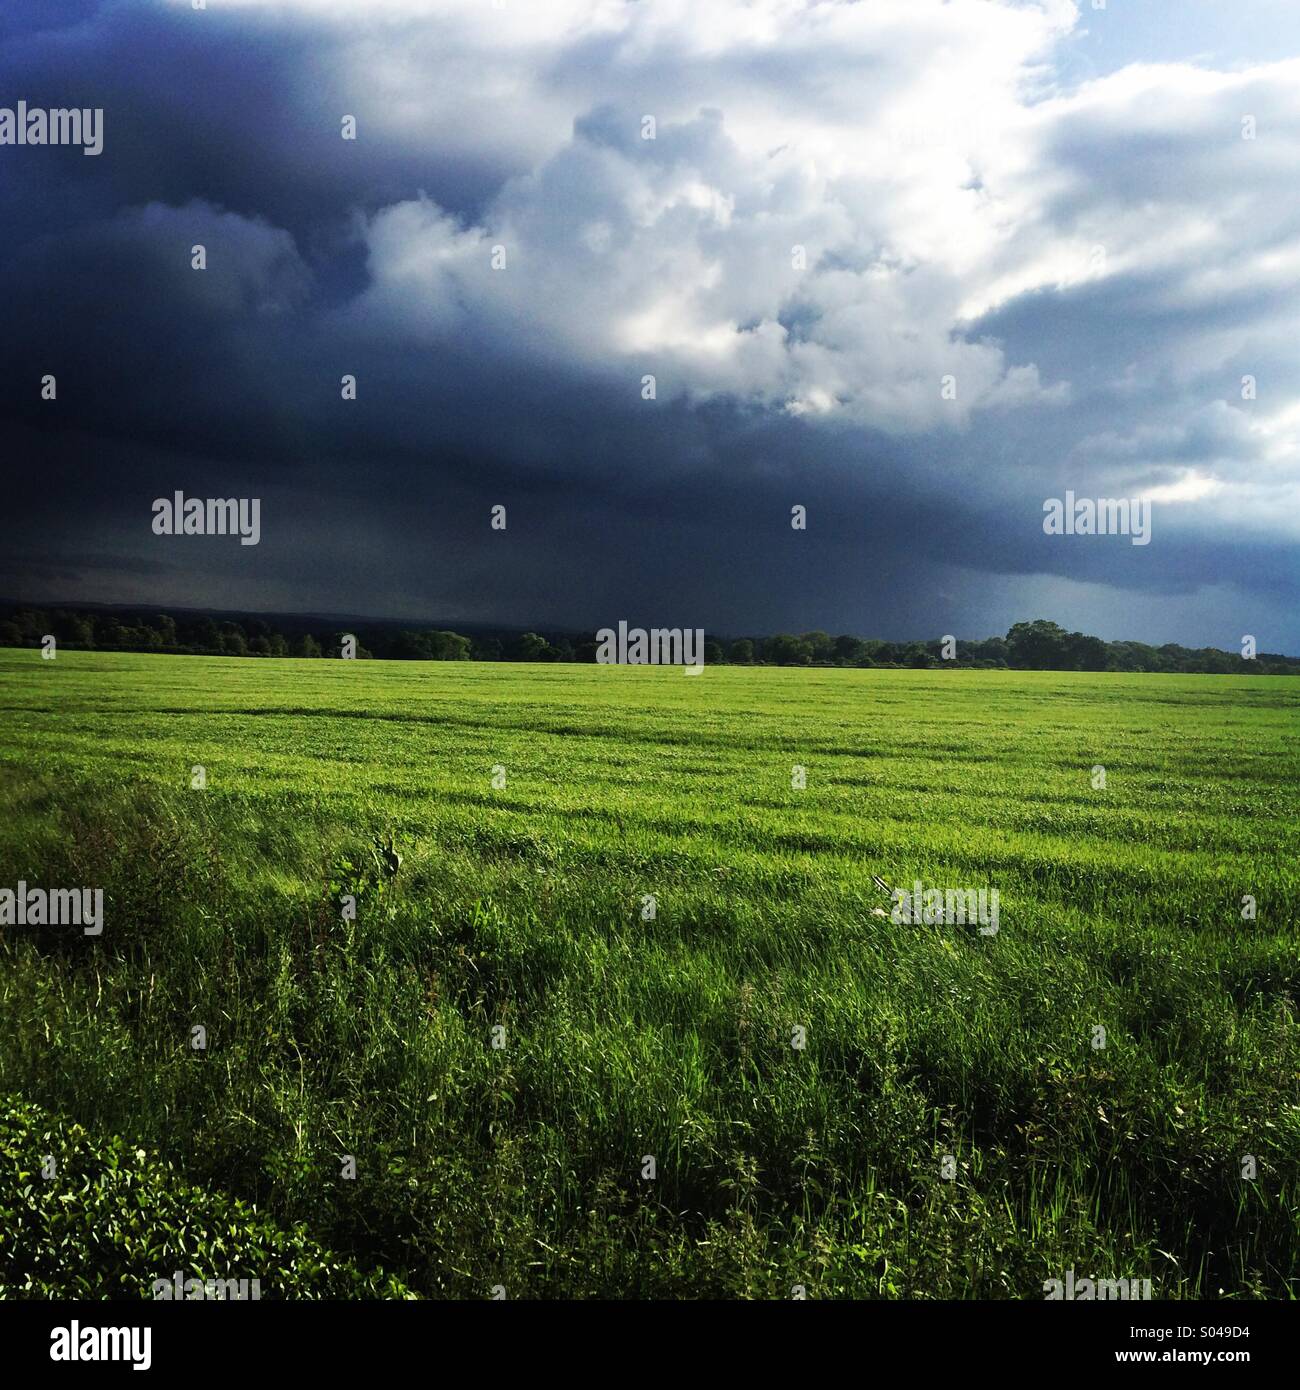 Stormy skies in the UK Stock Photo